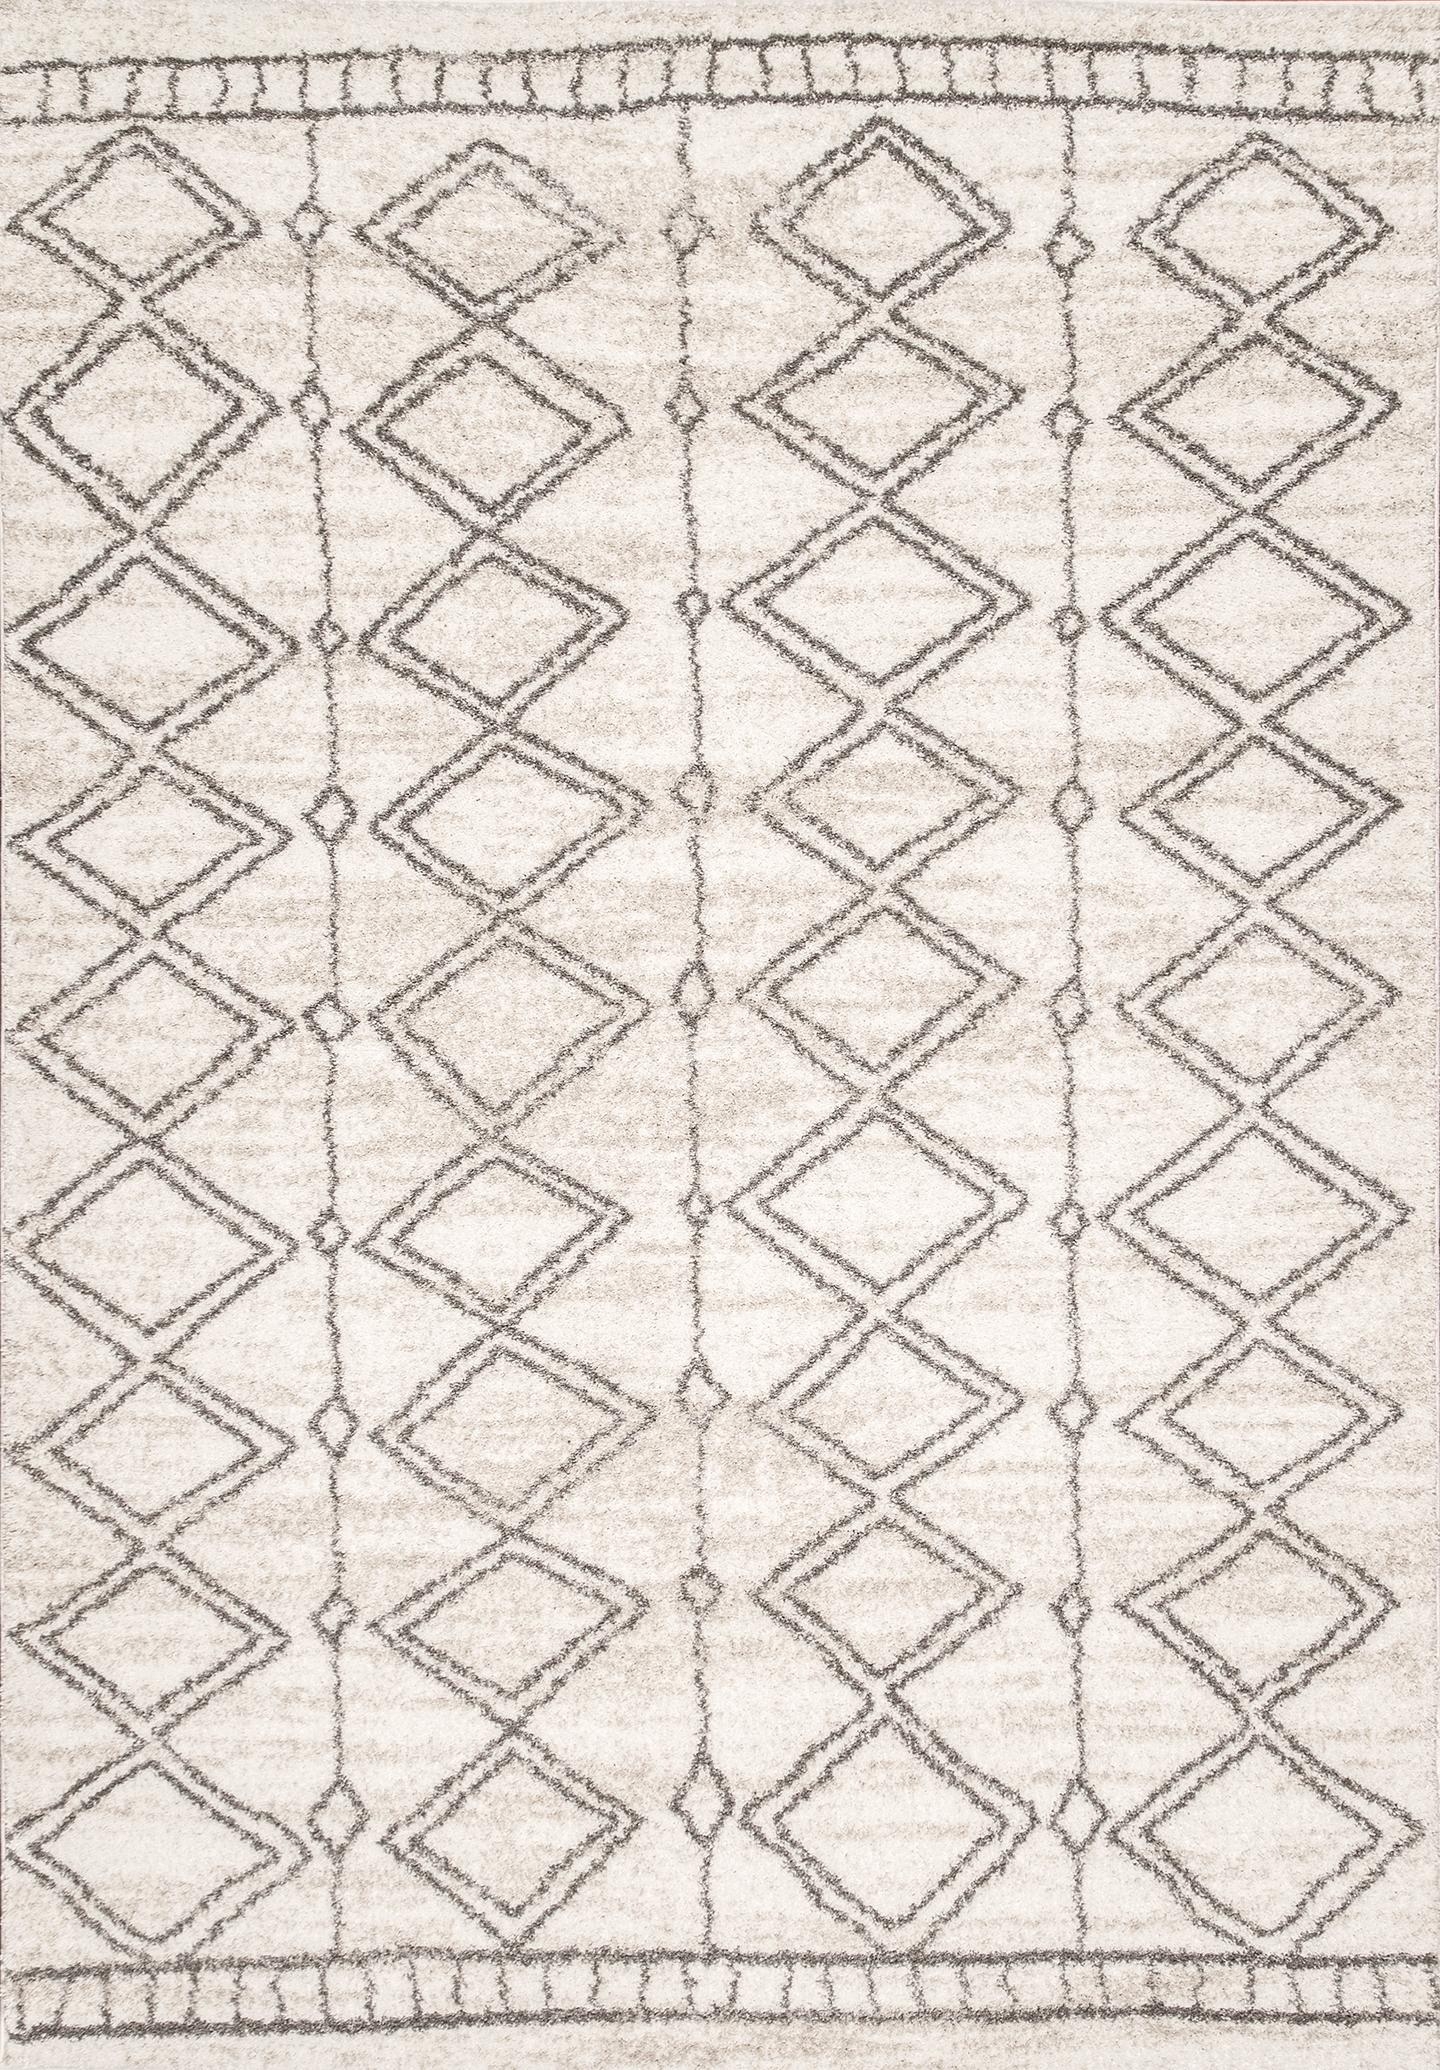 Transitional Moroccan Mariana Area Rug - Image 1